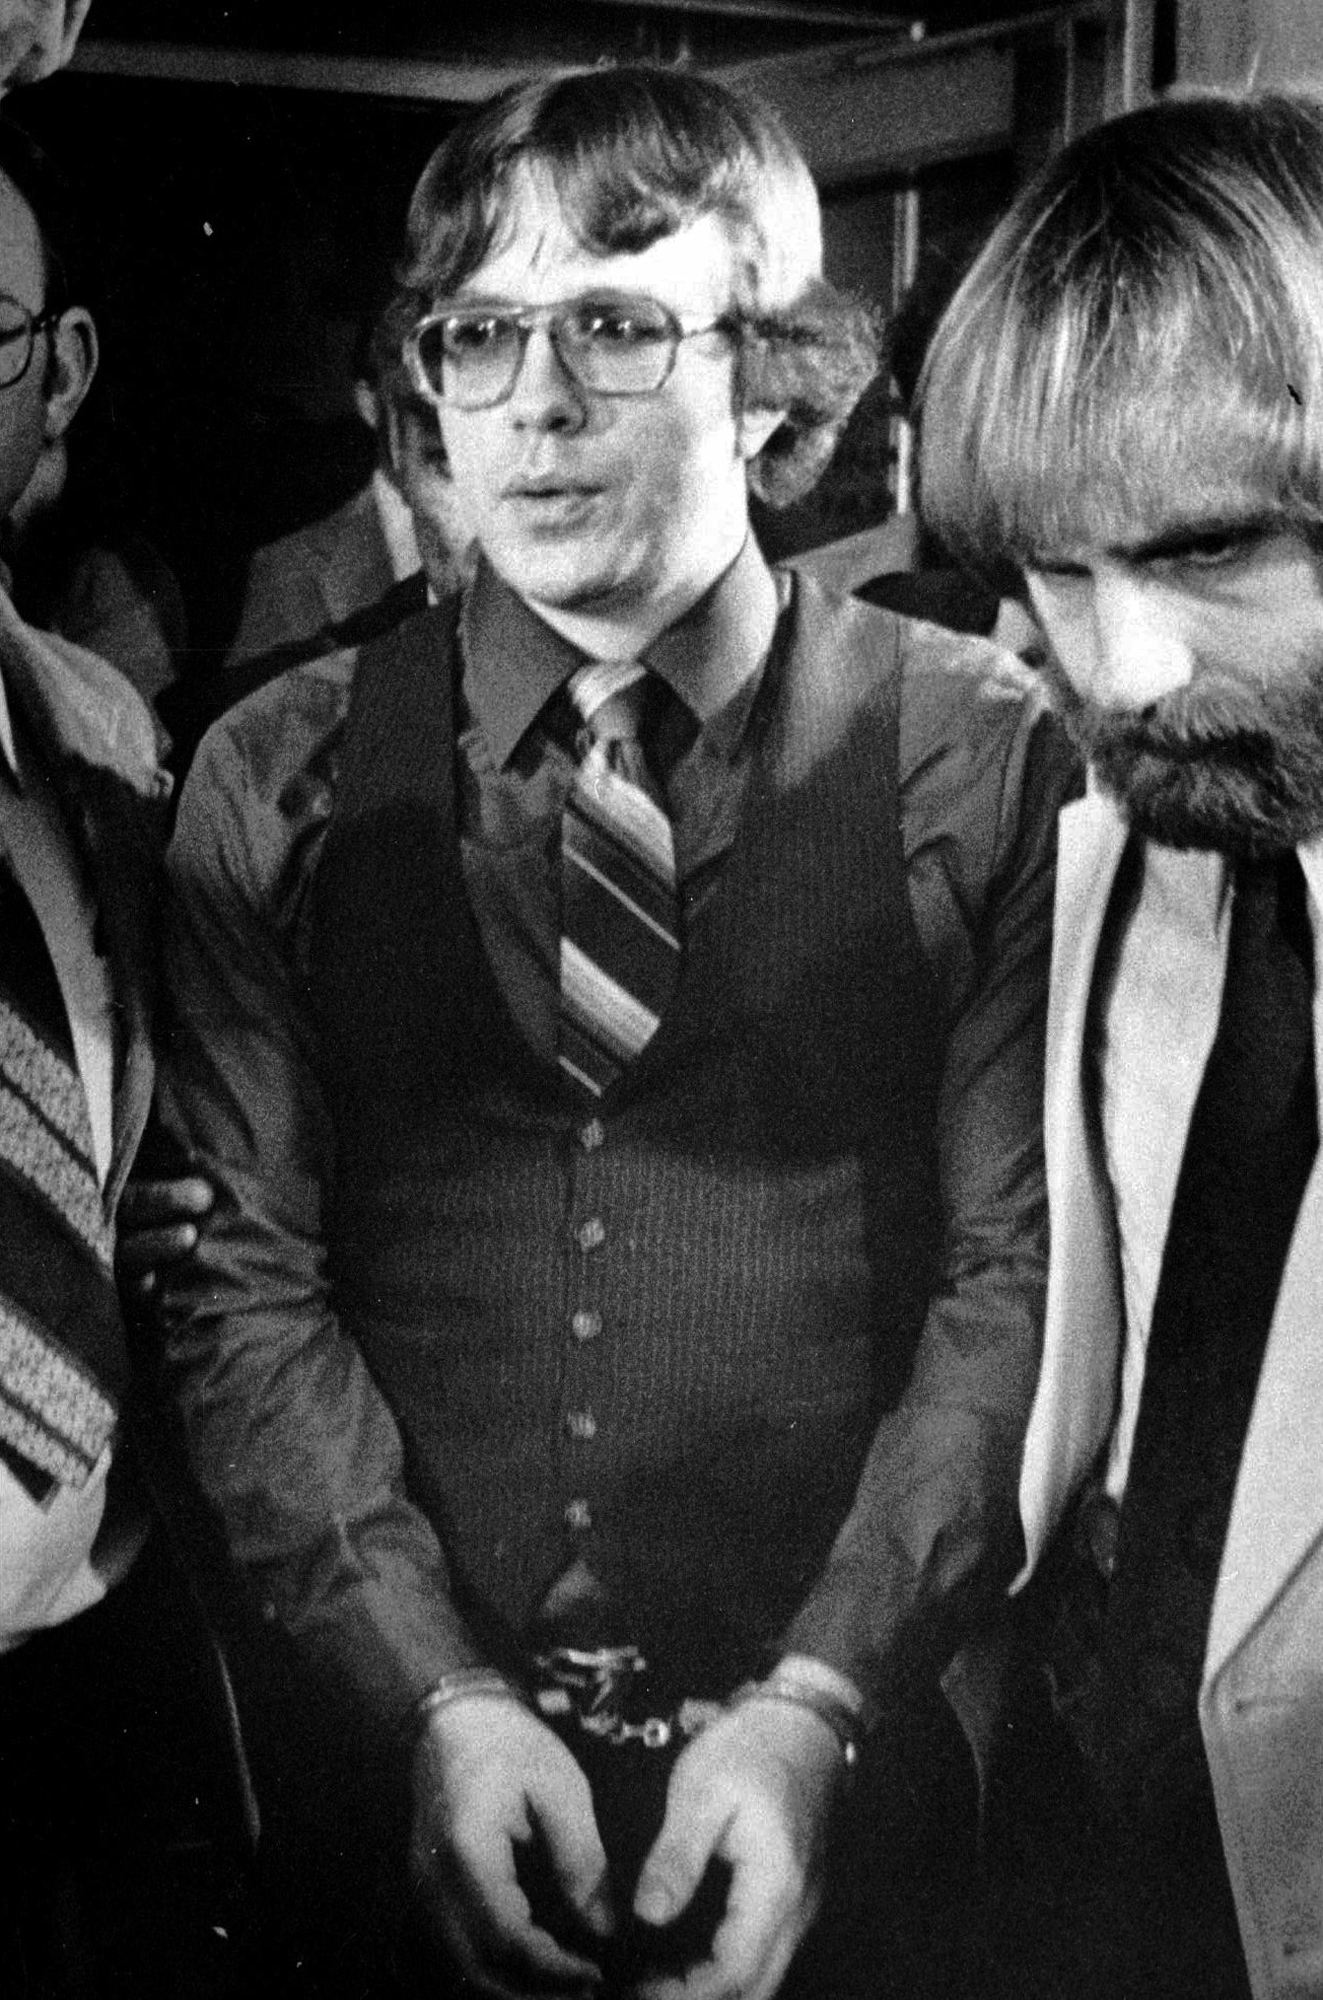 Joseph Paul Franklin following his conviction on two counts of first degree murder in Salt Lake City, June 2, 1981.